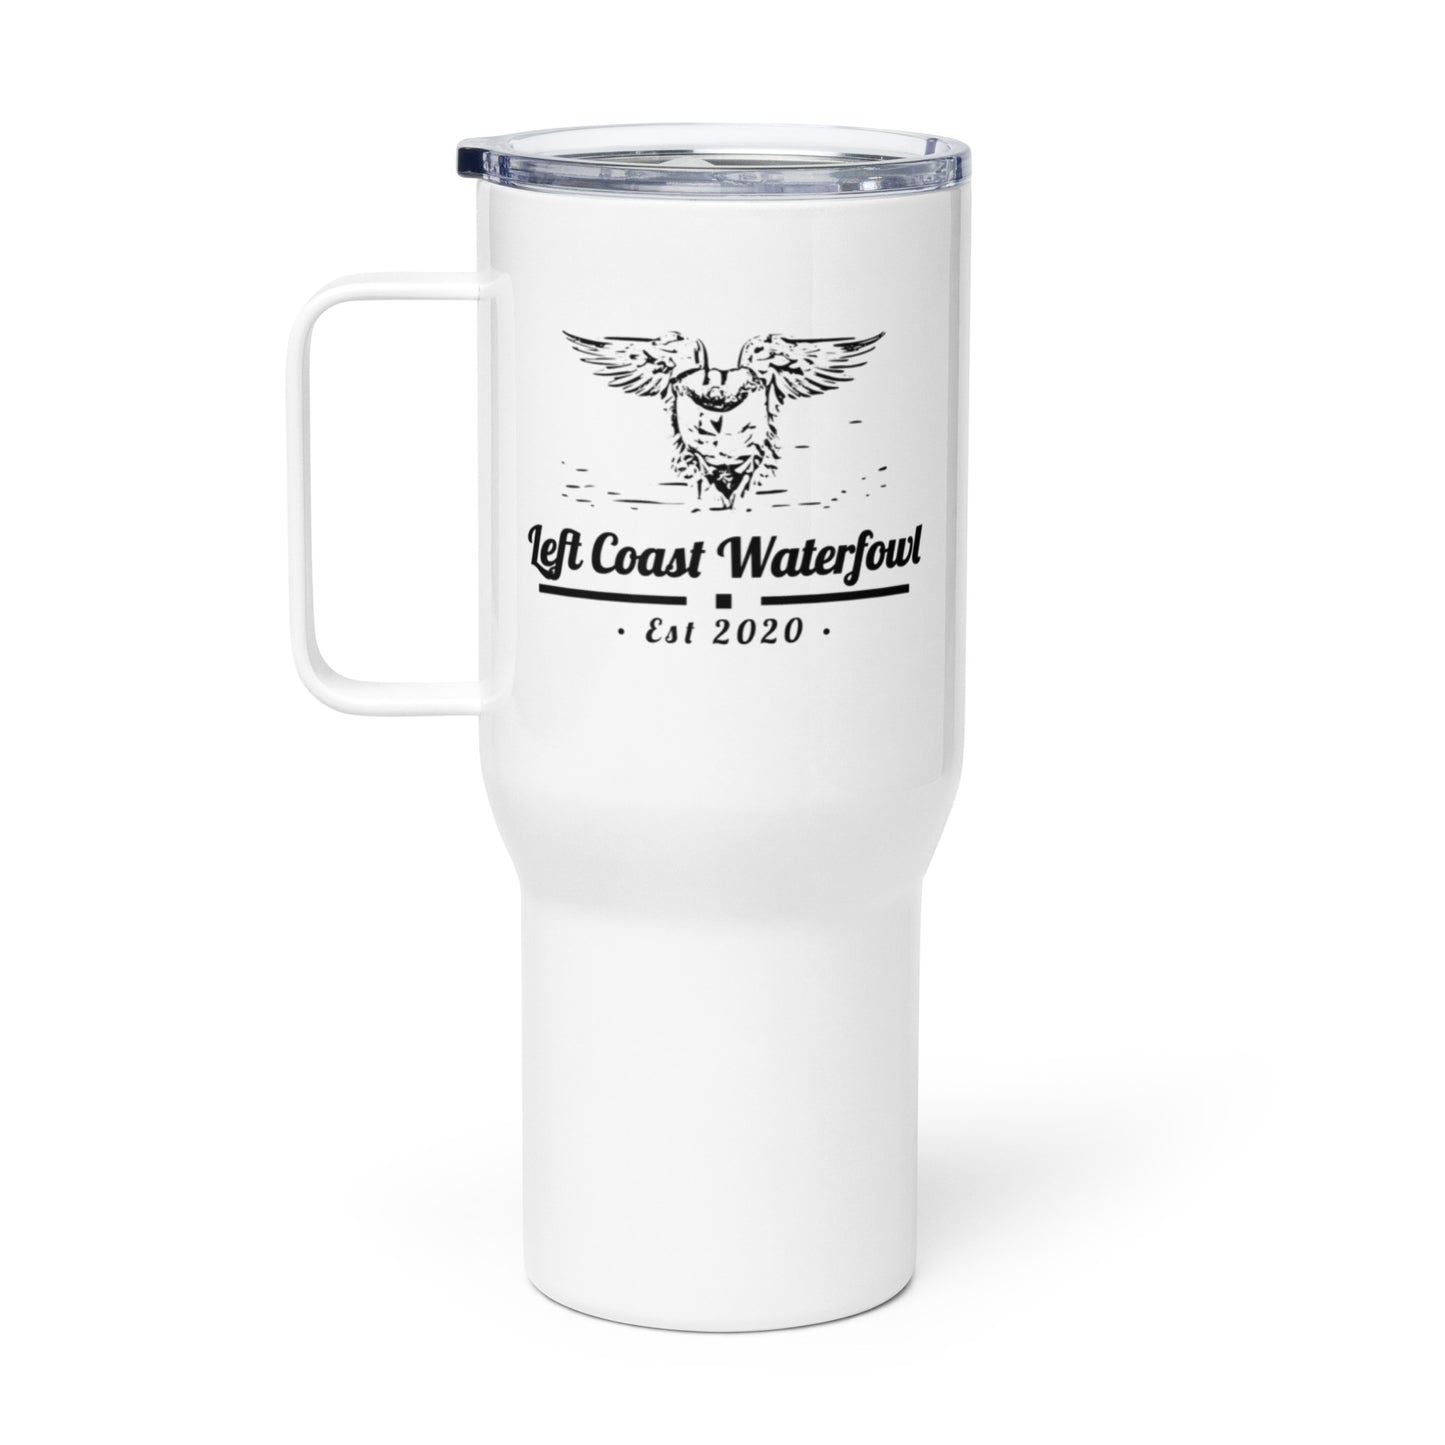 On the Deck Travel mug with a handle